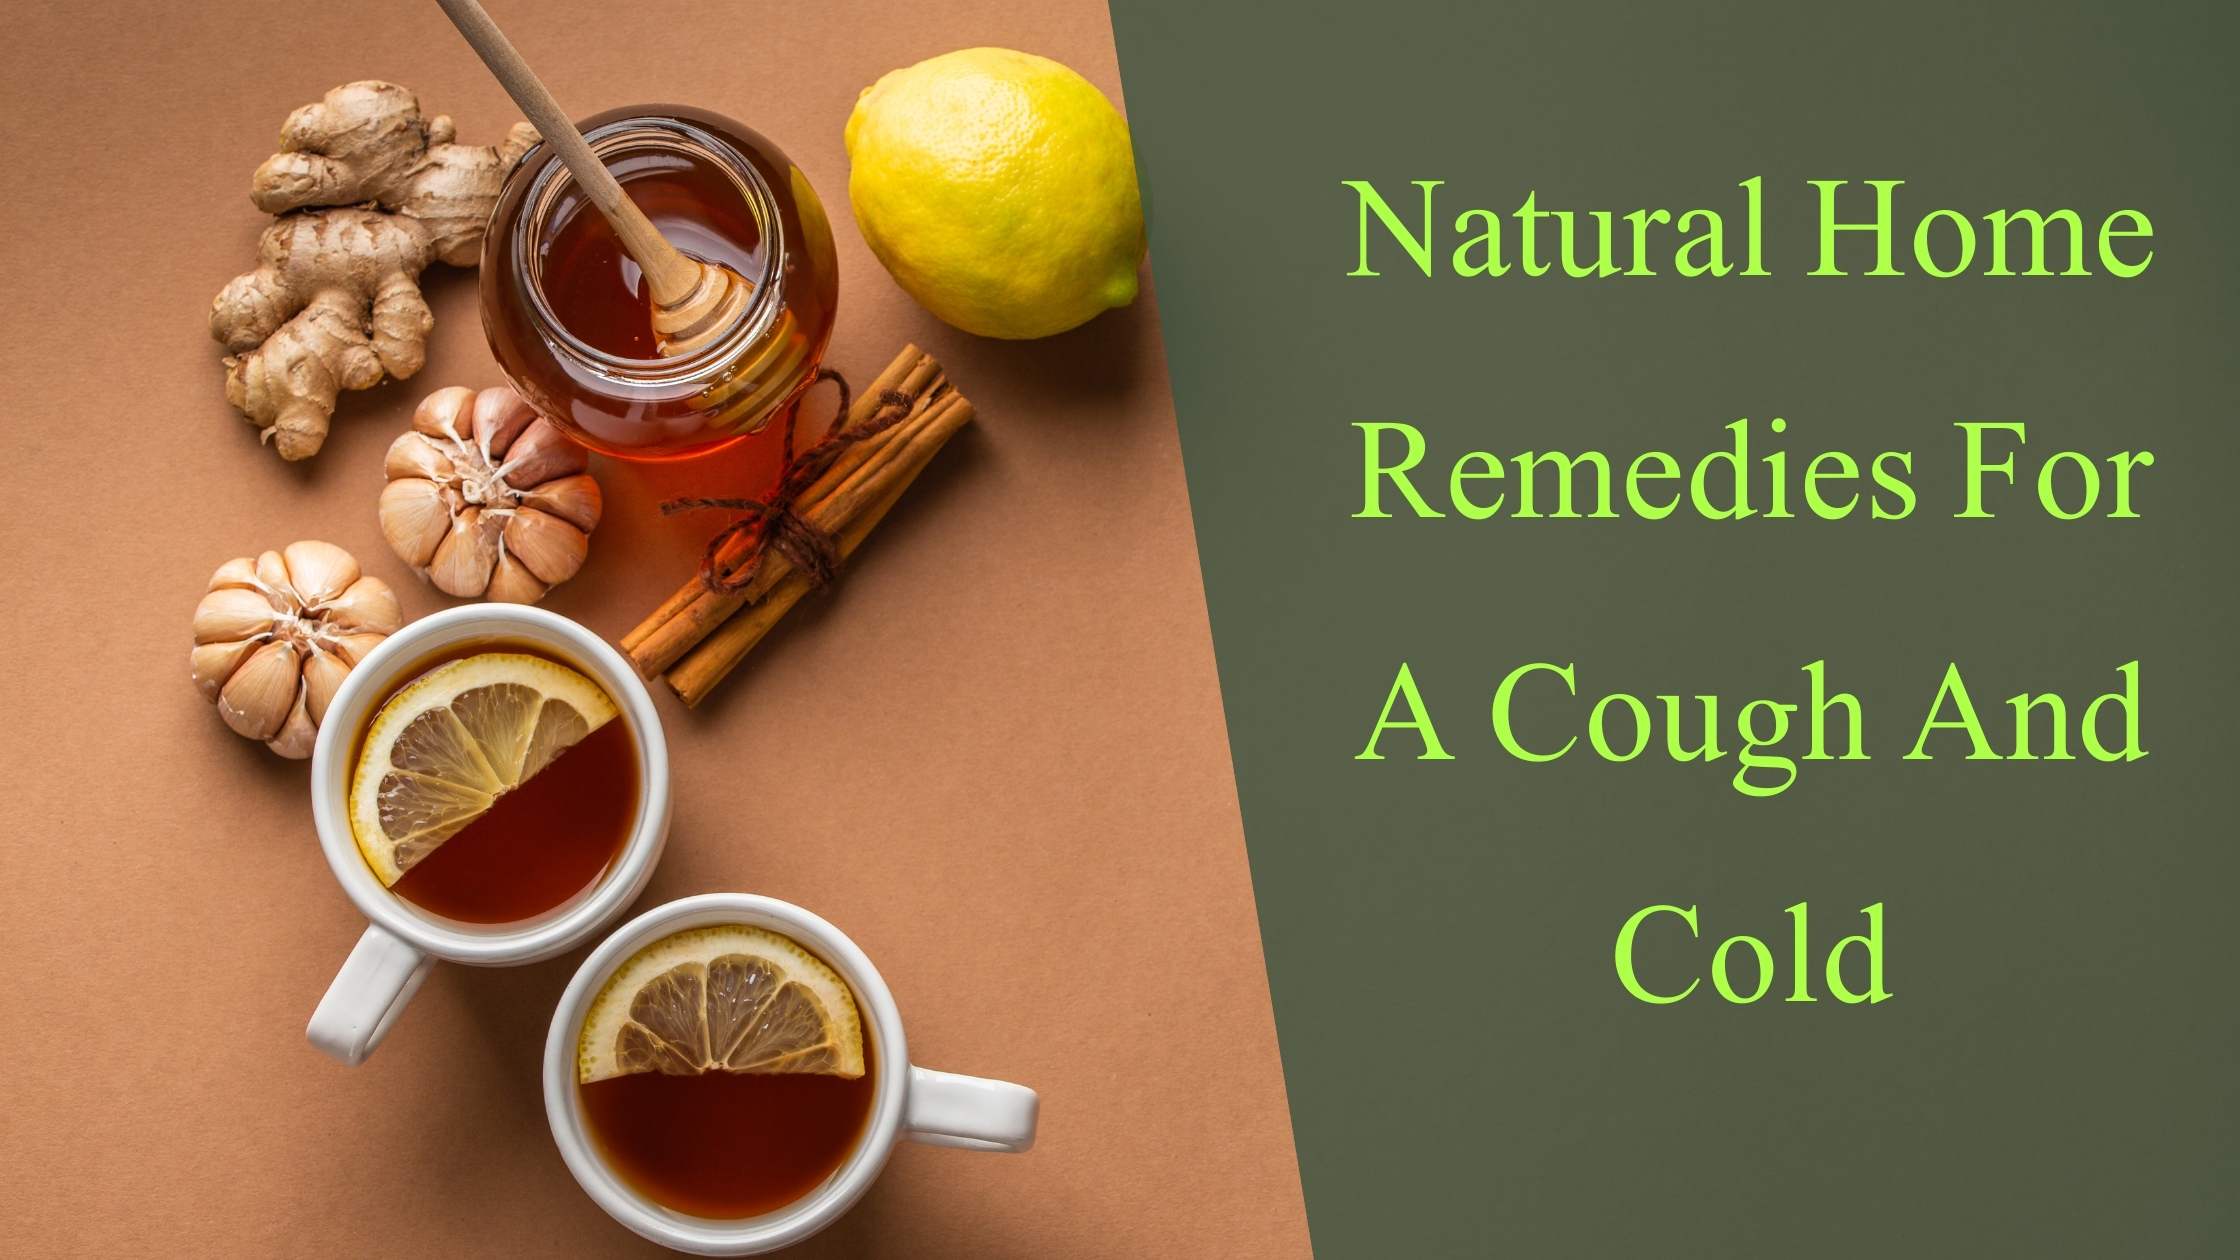 Natural Home Remedies For A Cough And Cold